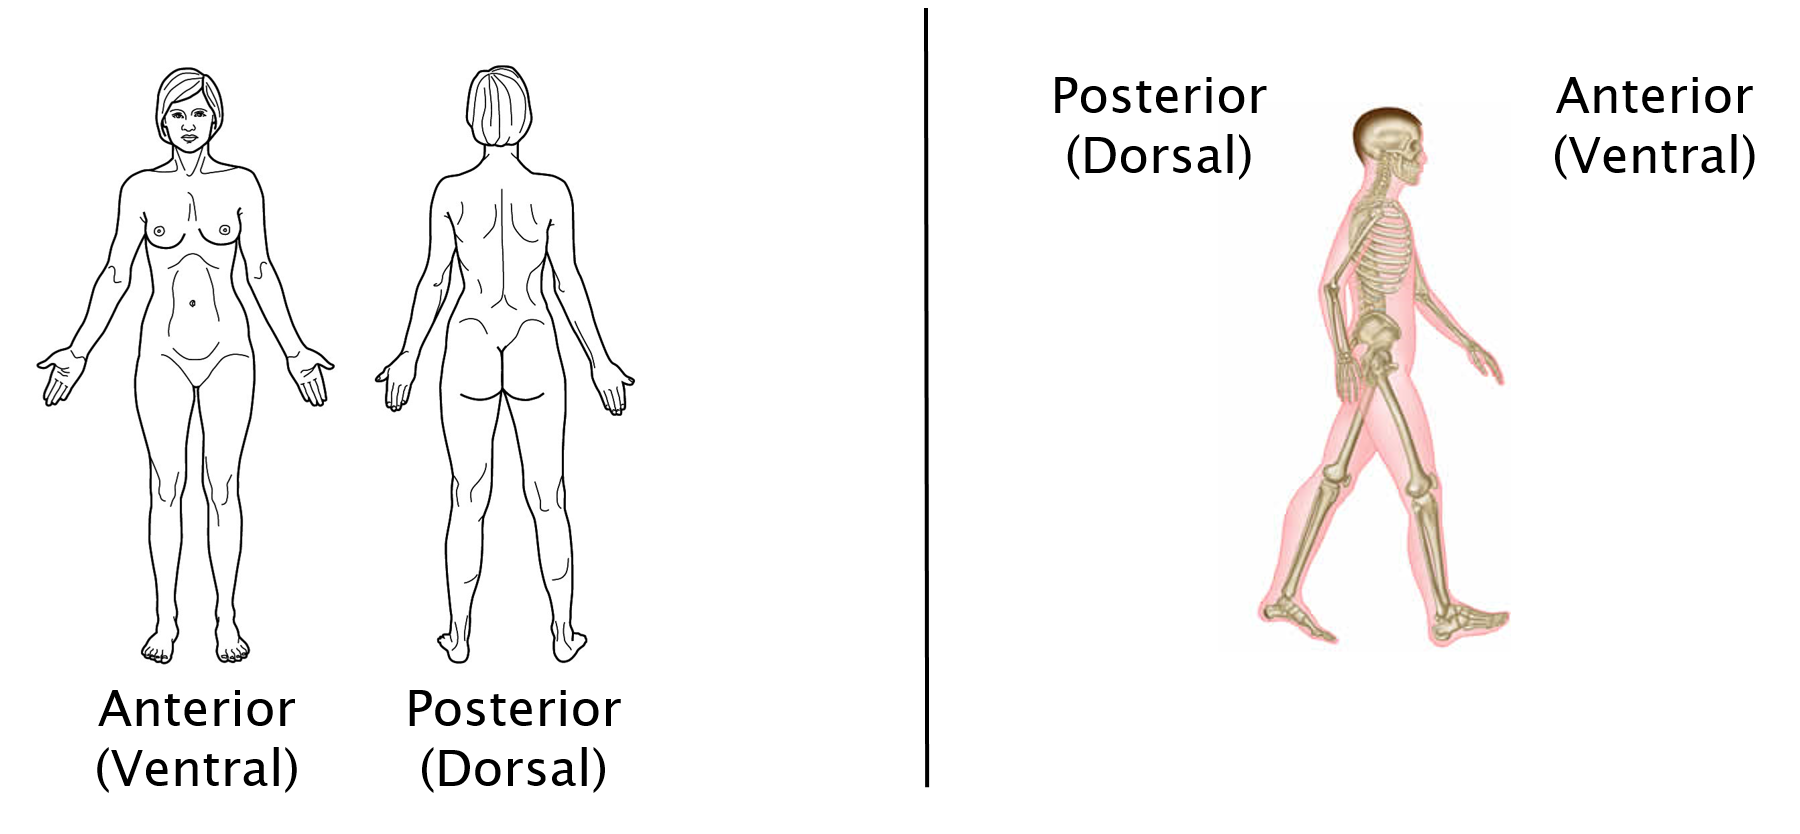 anatomical position and directional terms